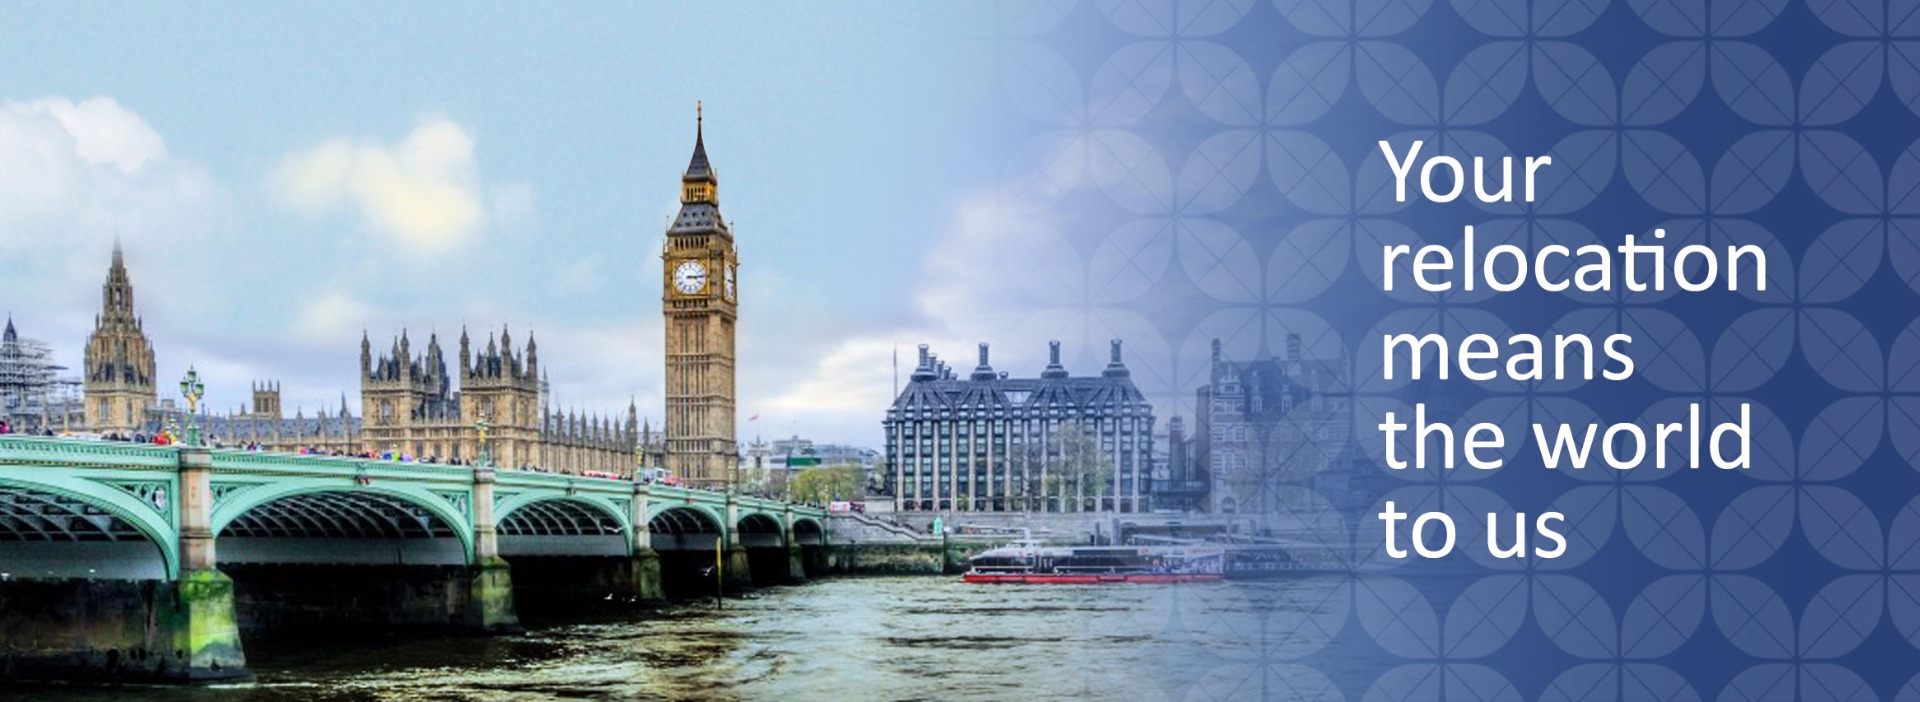 Global Relocation Support Services | London